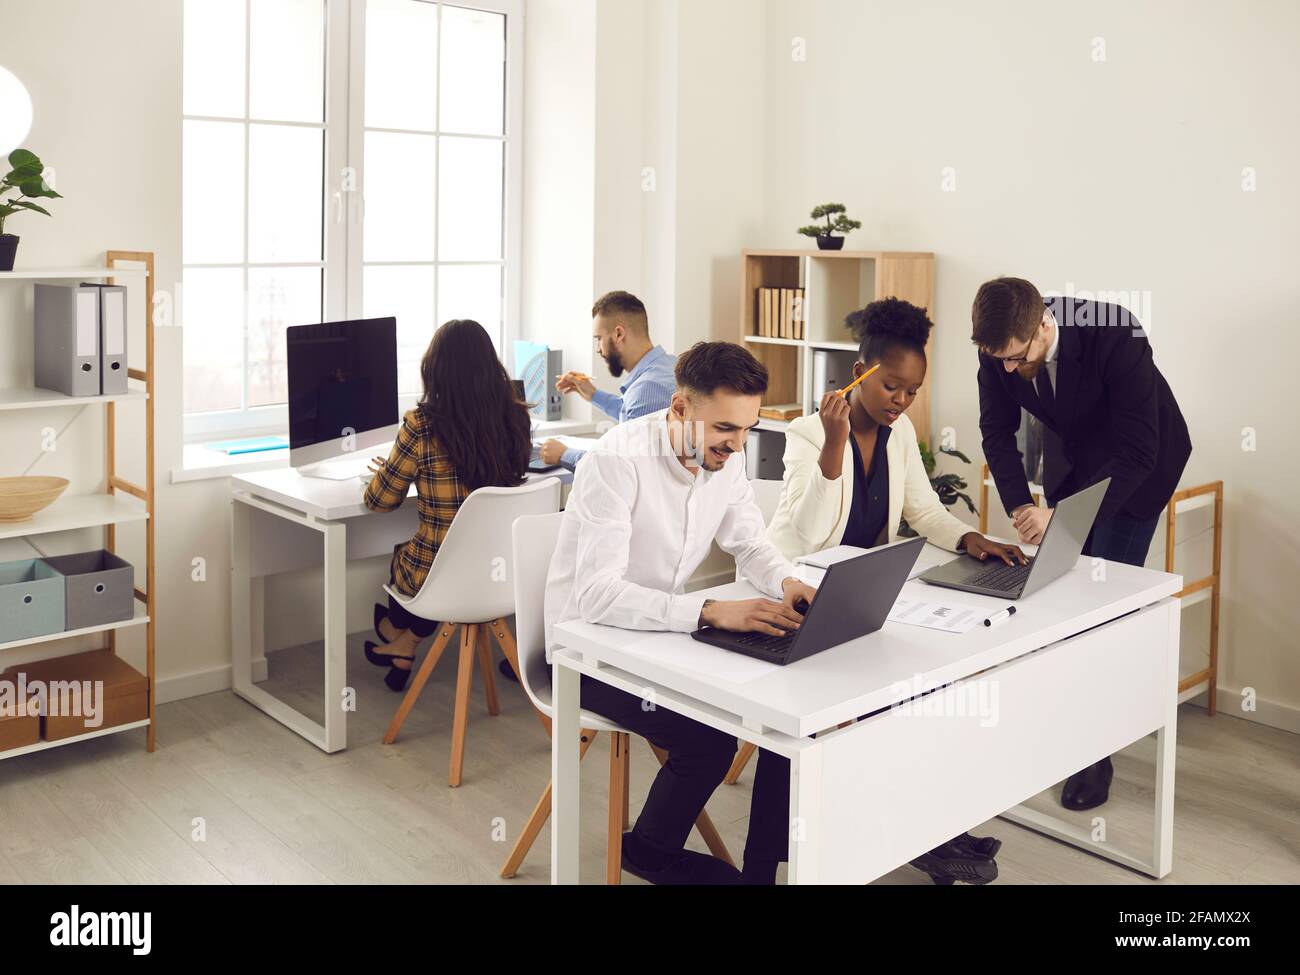 Group of multiethnic business colleagues working together in open space coworking. Stock Photo